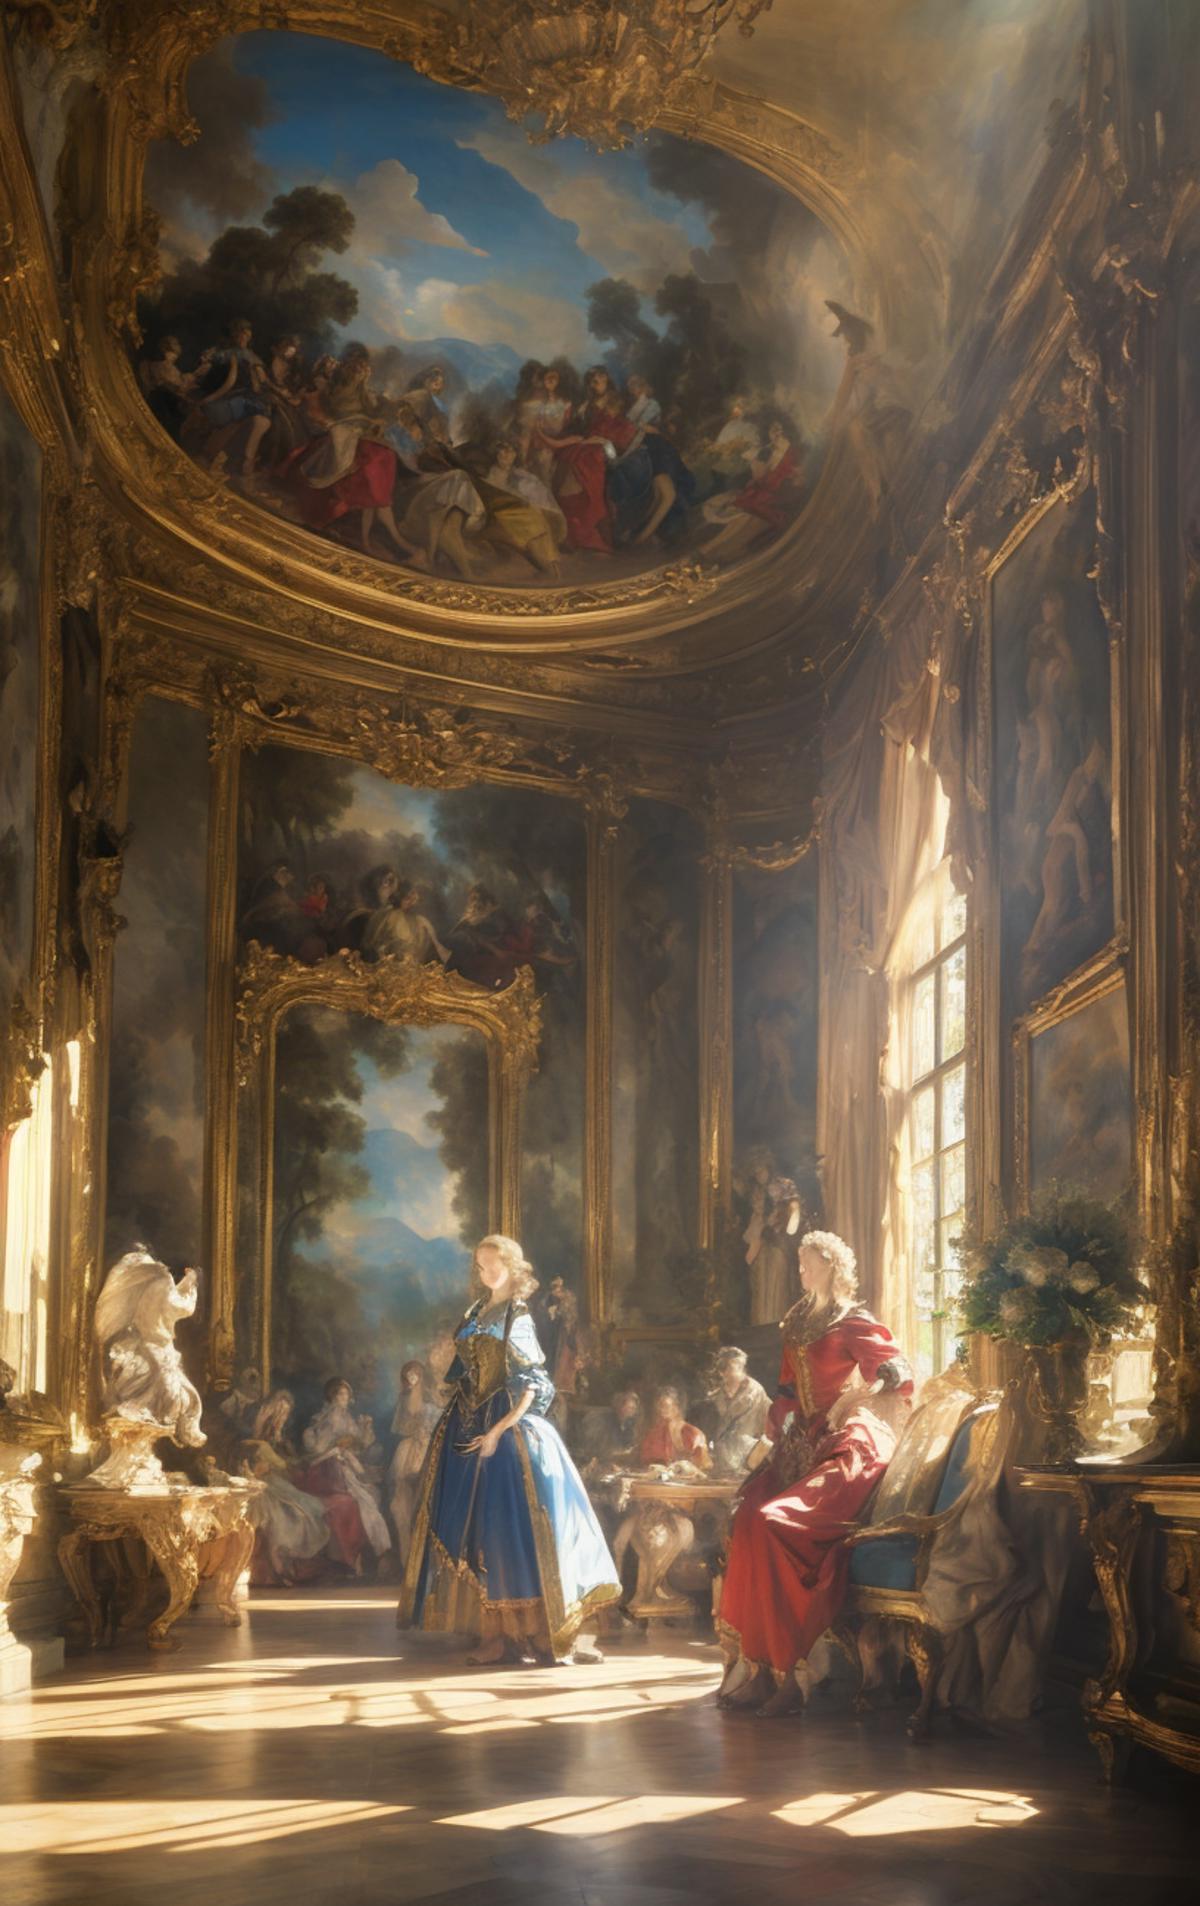 A group of people standing in a room with a gold ceiling and paintings on the walls.